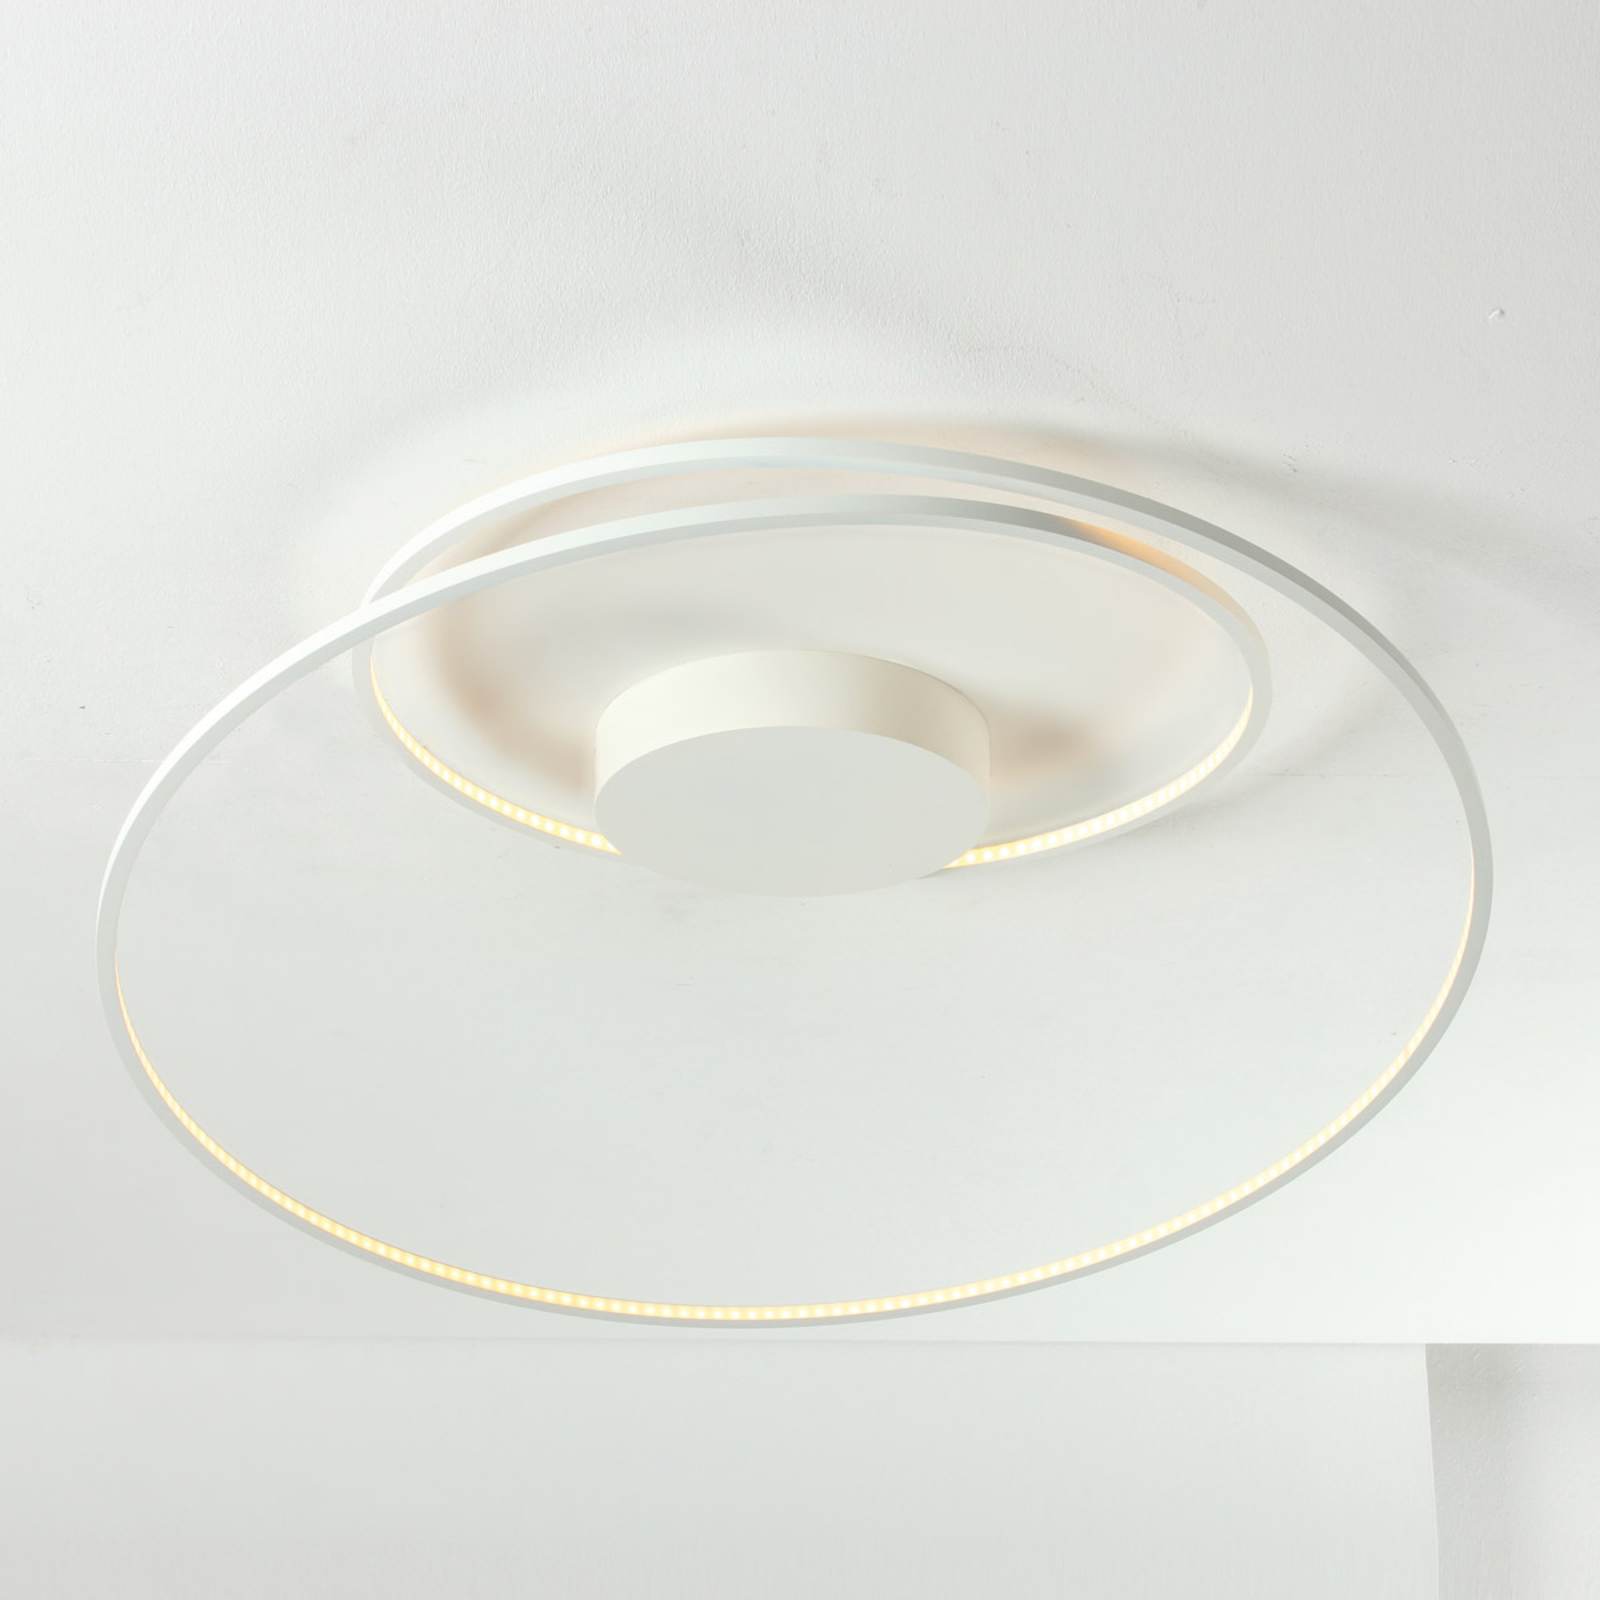 Flashy LED ceiling light At